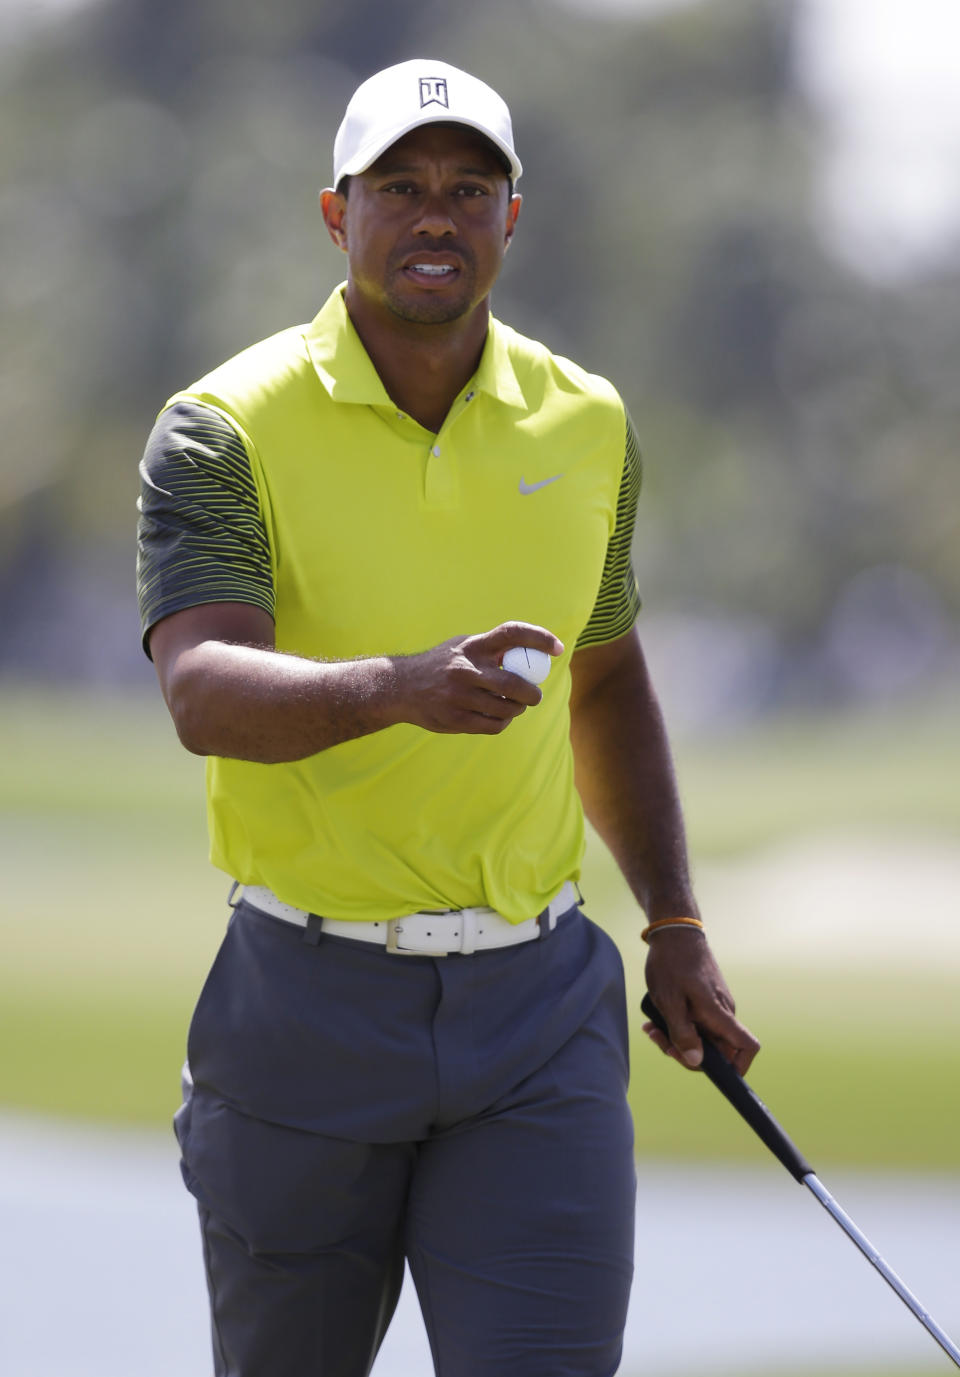 Tiger Woods holds the ball ball after making par on the 10th hole during the second round of the Cadillac Championship golf tournament Friday, March 7, 2014, in Doral, Fla. (AP Photo/Wilfredo Lee)